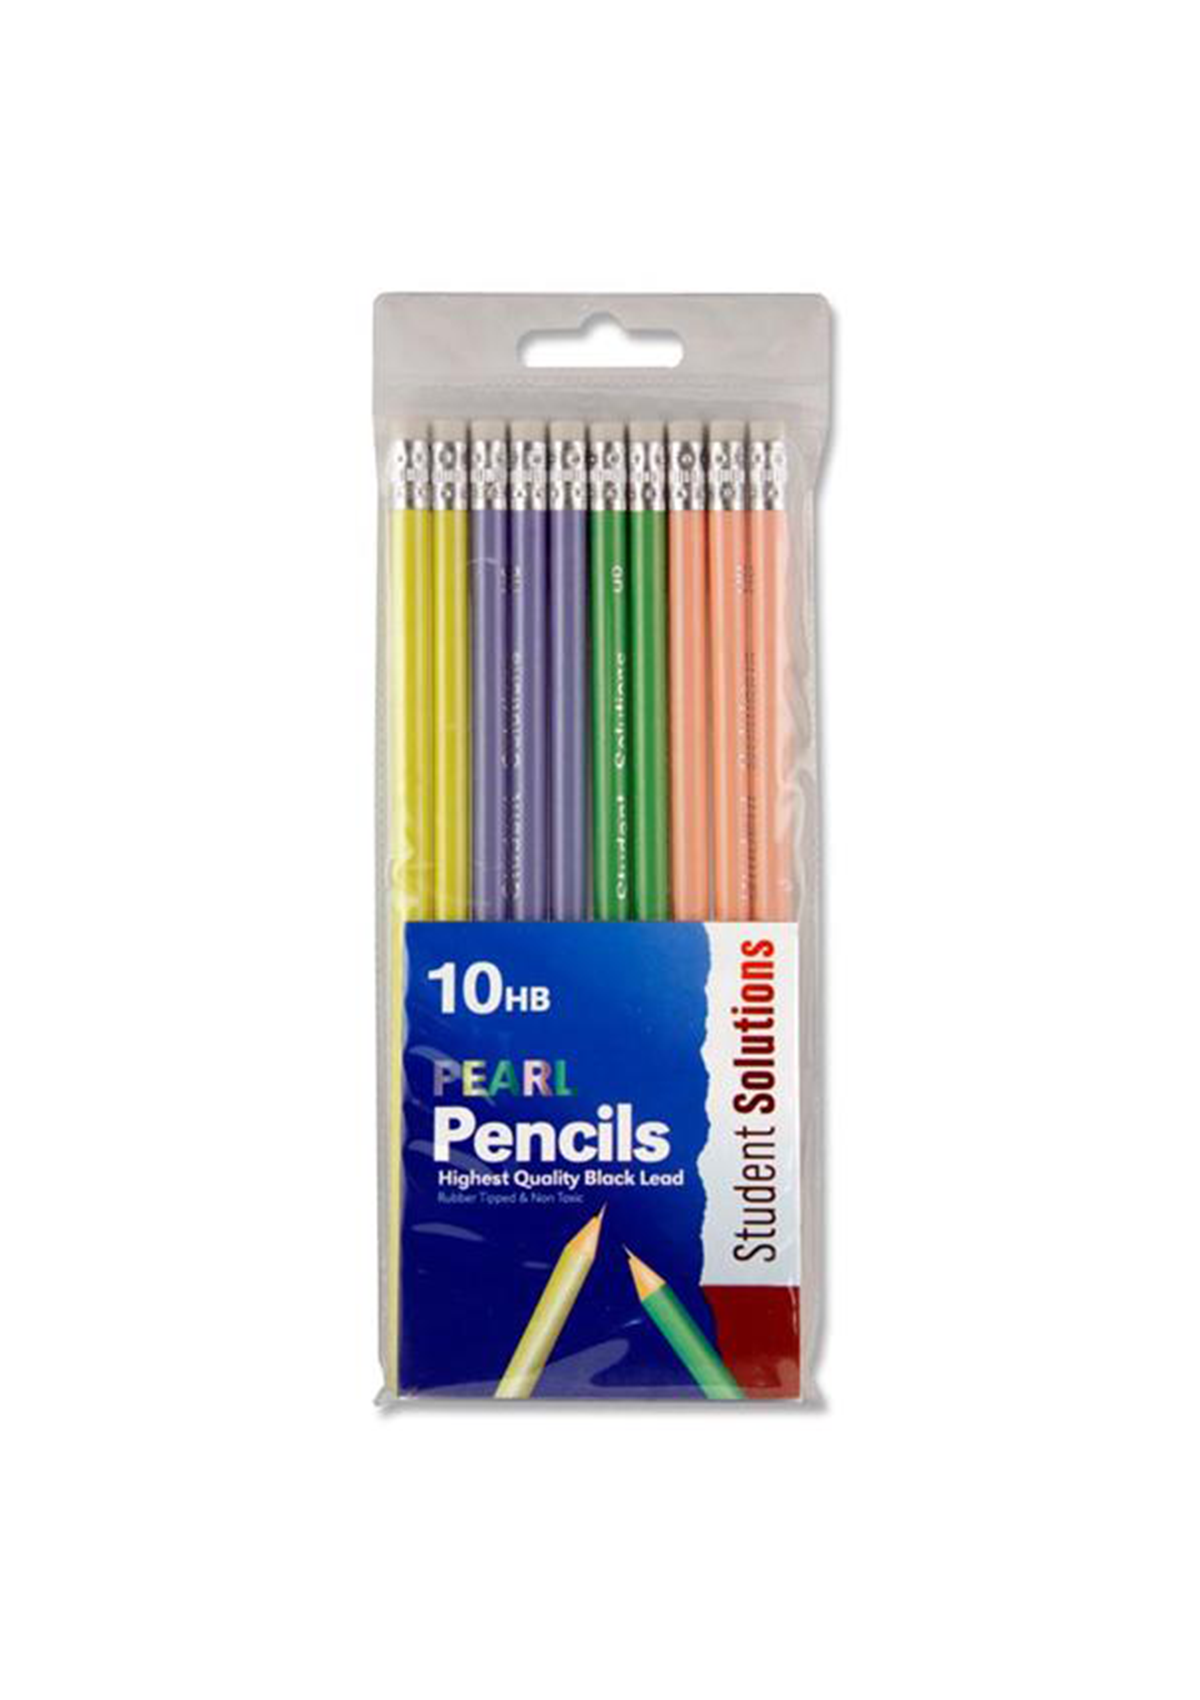 Wallet 10 Hb Rubber Tipped Pencils - Pearl